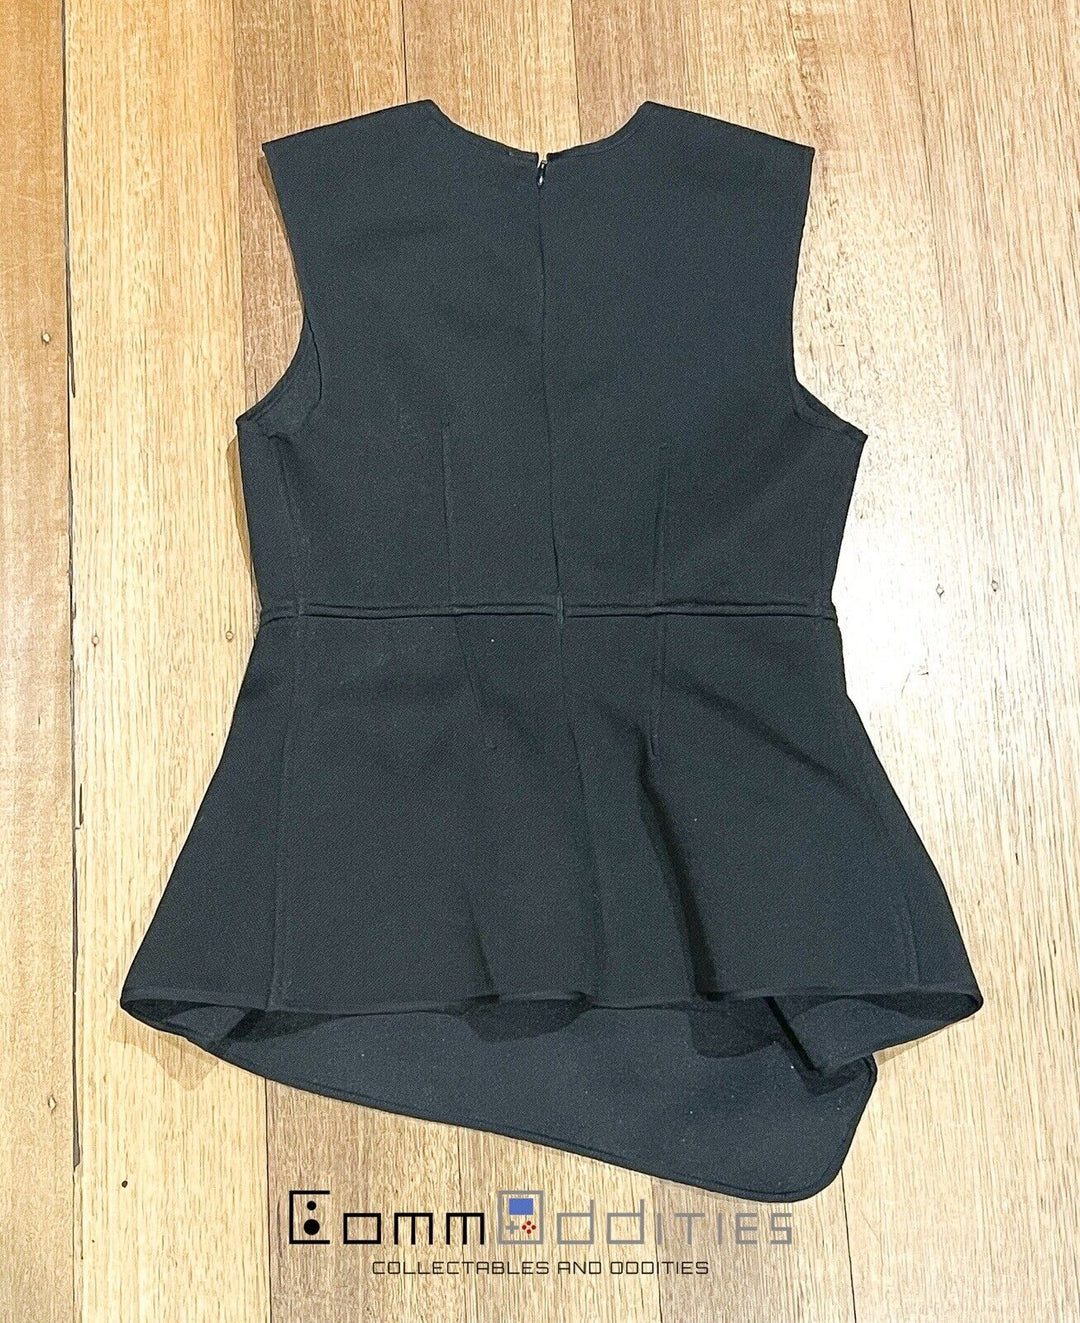 Witchery Black Short Sleeve Ladies Top - Size XS - FREE POST!